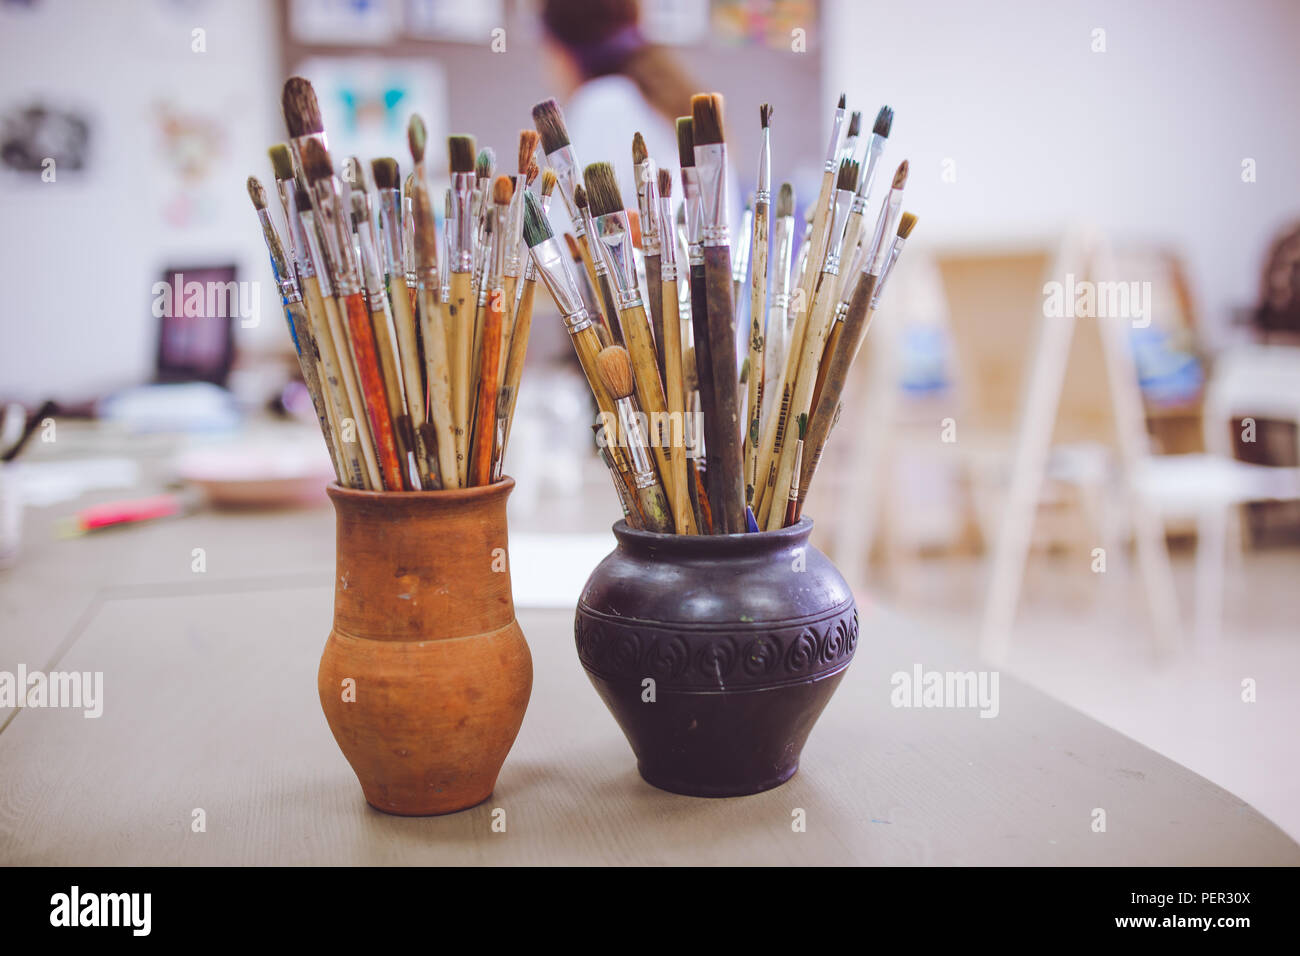 A bunch of art brushes standing in ceramic vases, on the table in the art studio. Stock Photo